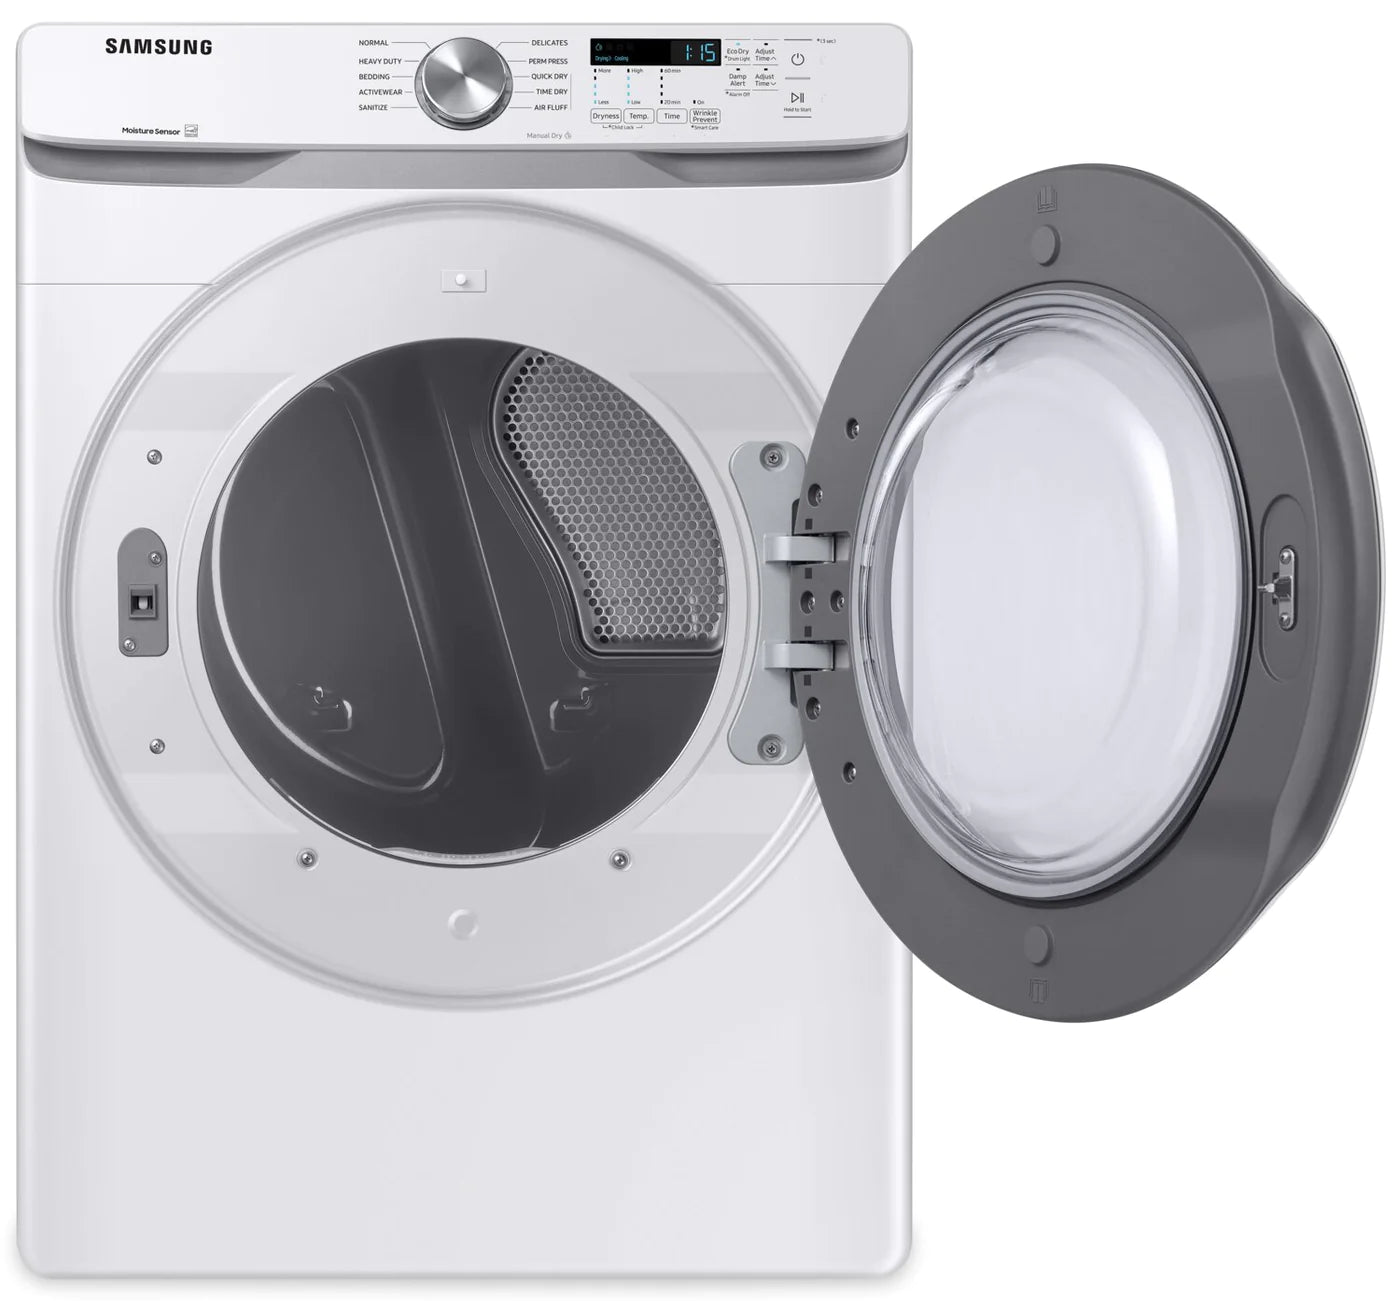 Samsung Washer and Dryer 27" White WF45T6000AW & DVE45T6005W